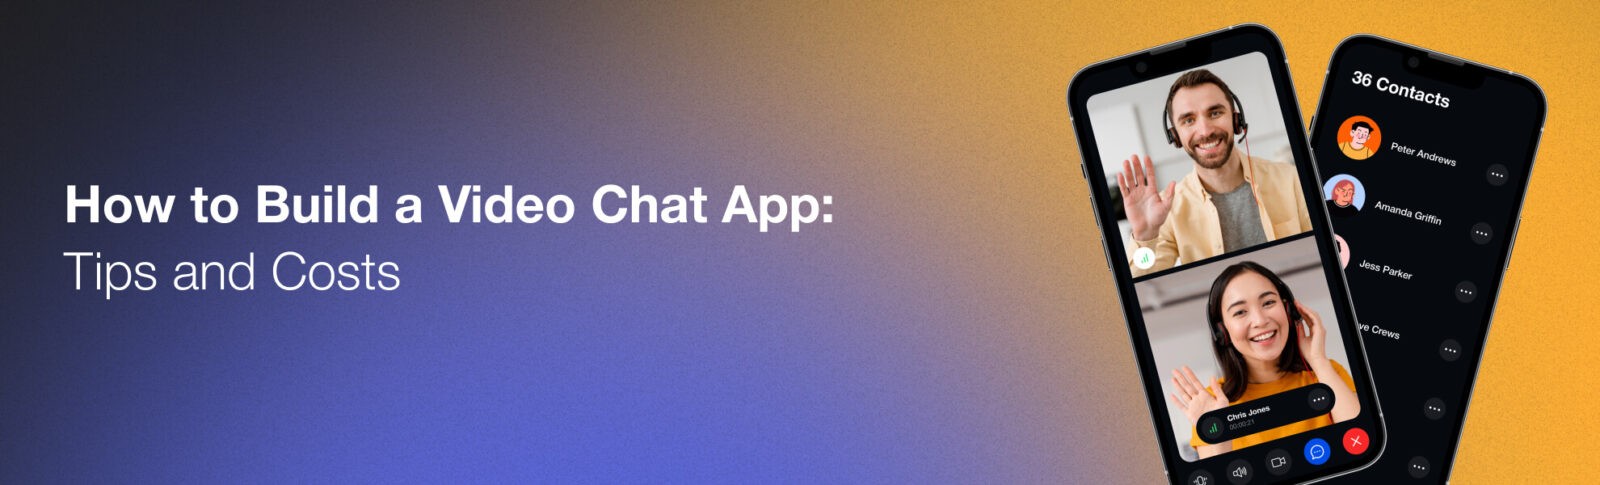 How to Build a Video Chat App: Tips and Costs